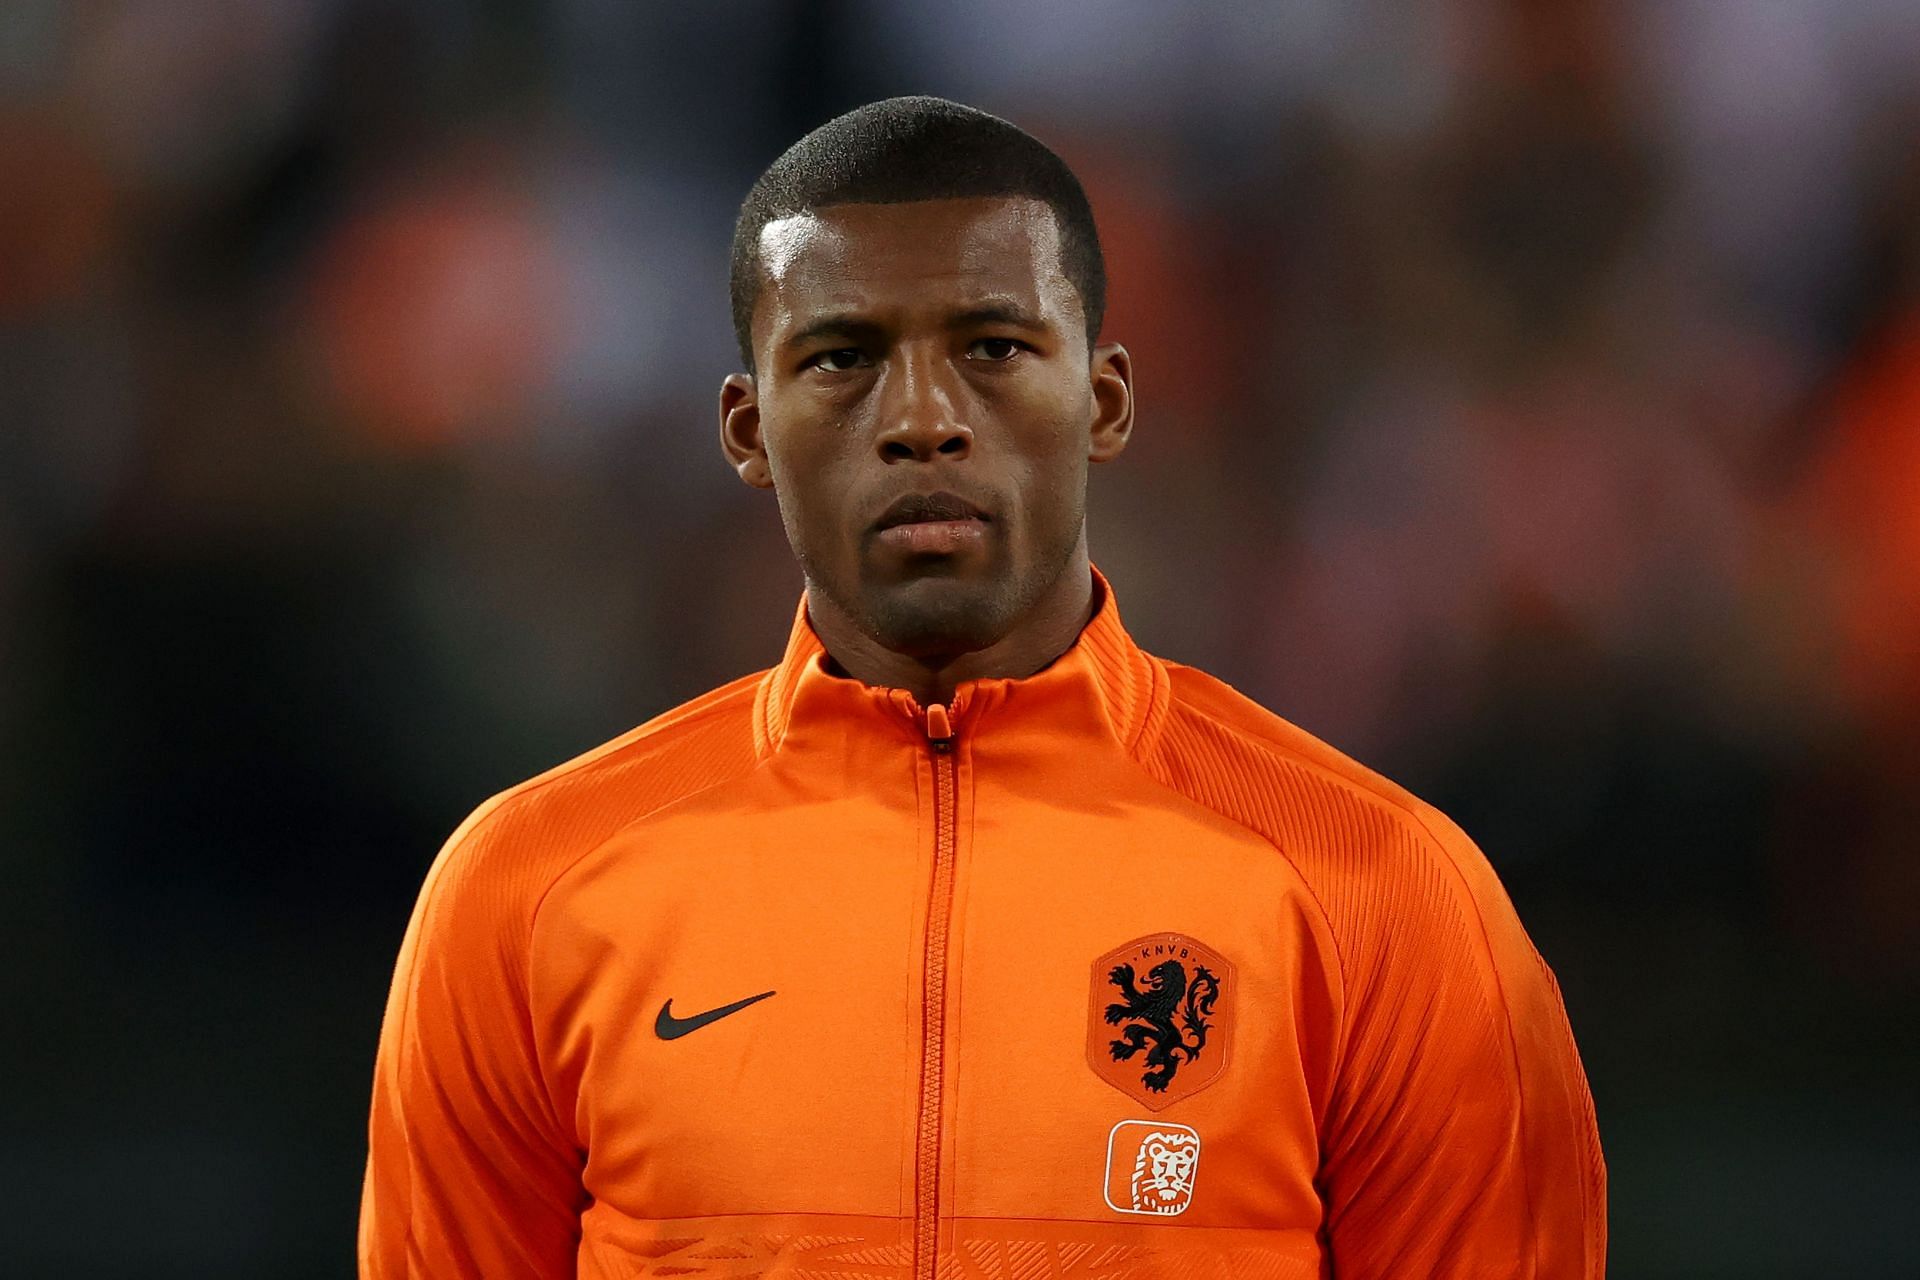 Wijnaldum is ready to join Arsenal should the opportunity present itself.